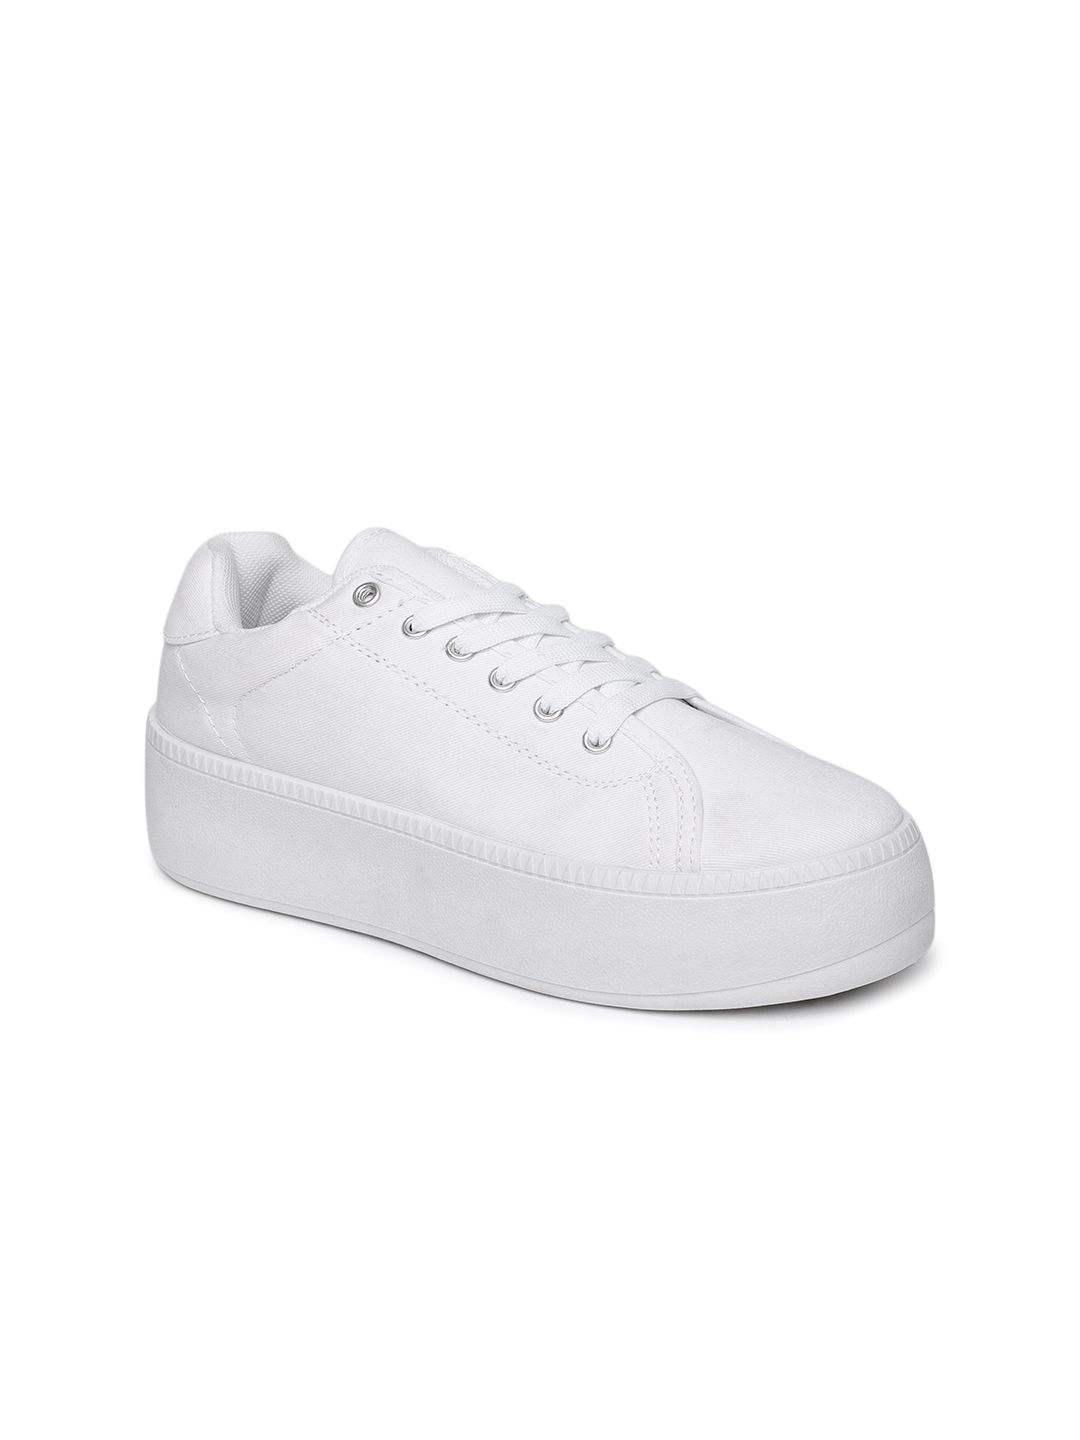 Truffle Collection Women White Sneakers Price in India